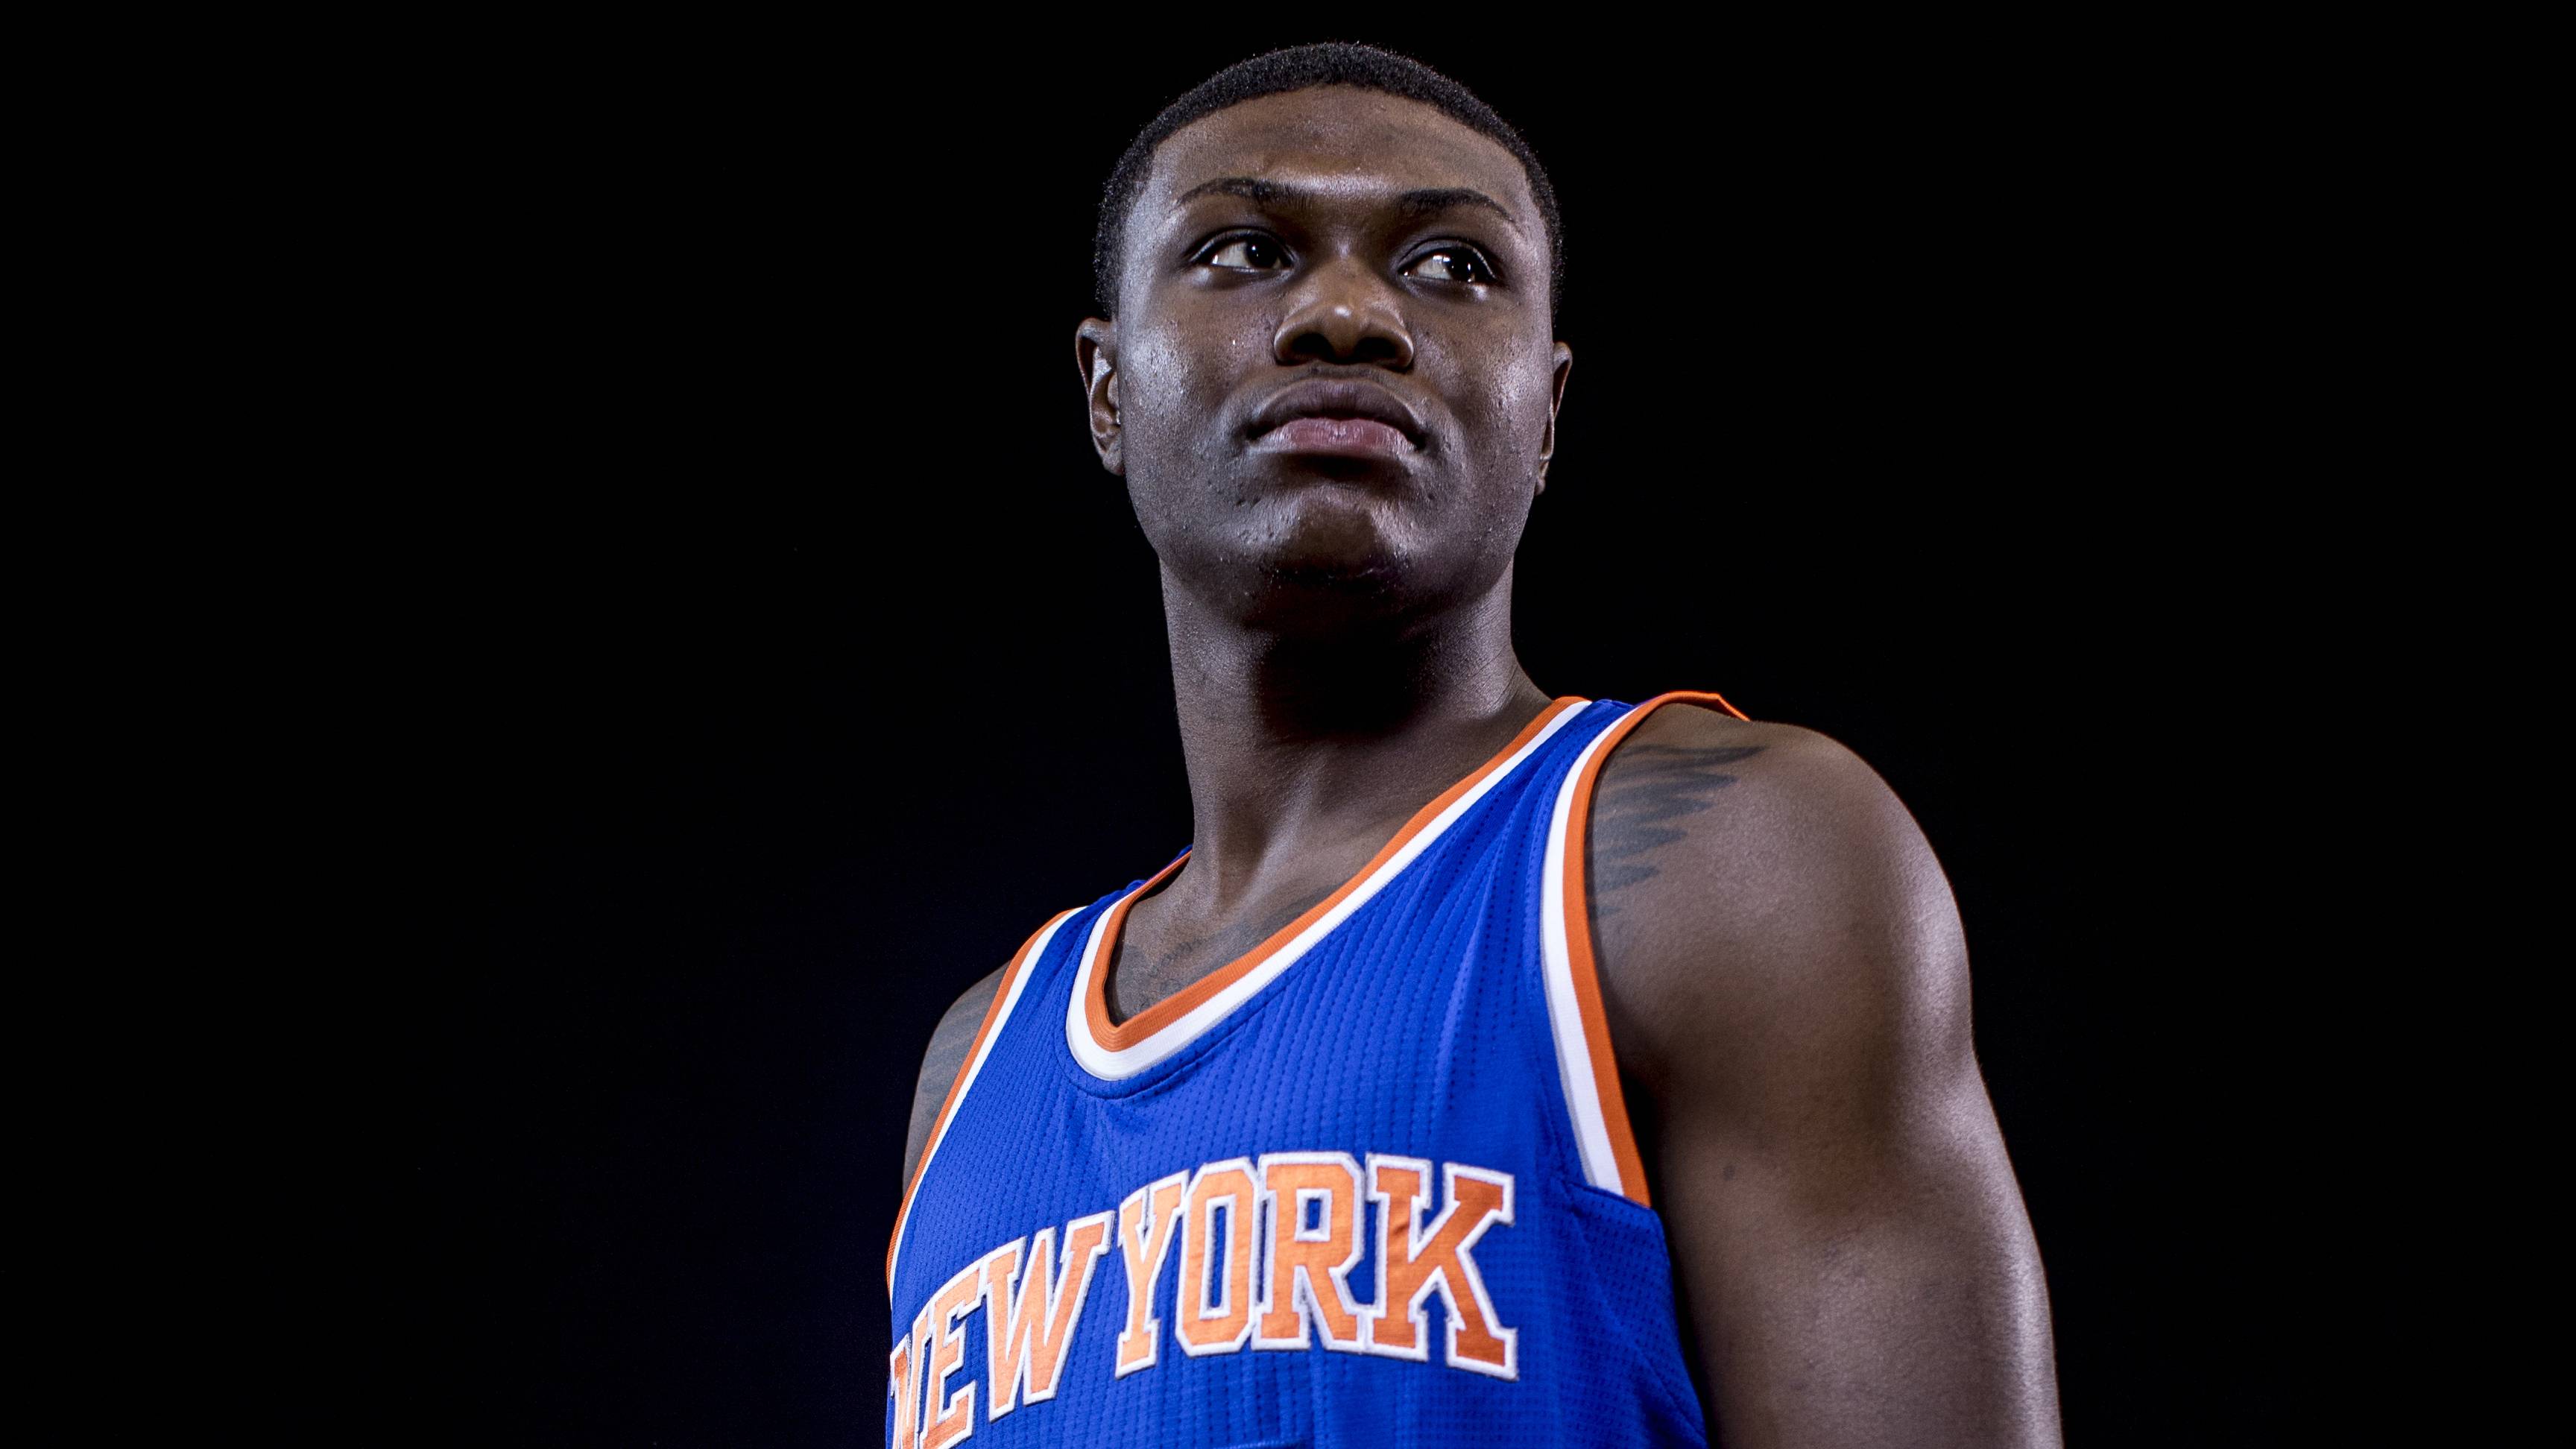 TARRYTOWN, NY - AUGUST 03: Cleanthony Early #17 of the New York Knicks poses for a portrait during the 2014 NBA rookie photo shoot at MSG Training Center on August 3, 2014 in Tarrytown, New York. NOTE TO USER: User expressly acknowledges and agrees that, by downloading and or using this photograph, User is consenting to the terms and conditions of the Getty Images License Agreement. (Photo by Nick Laham/Getty Images)